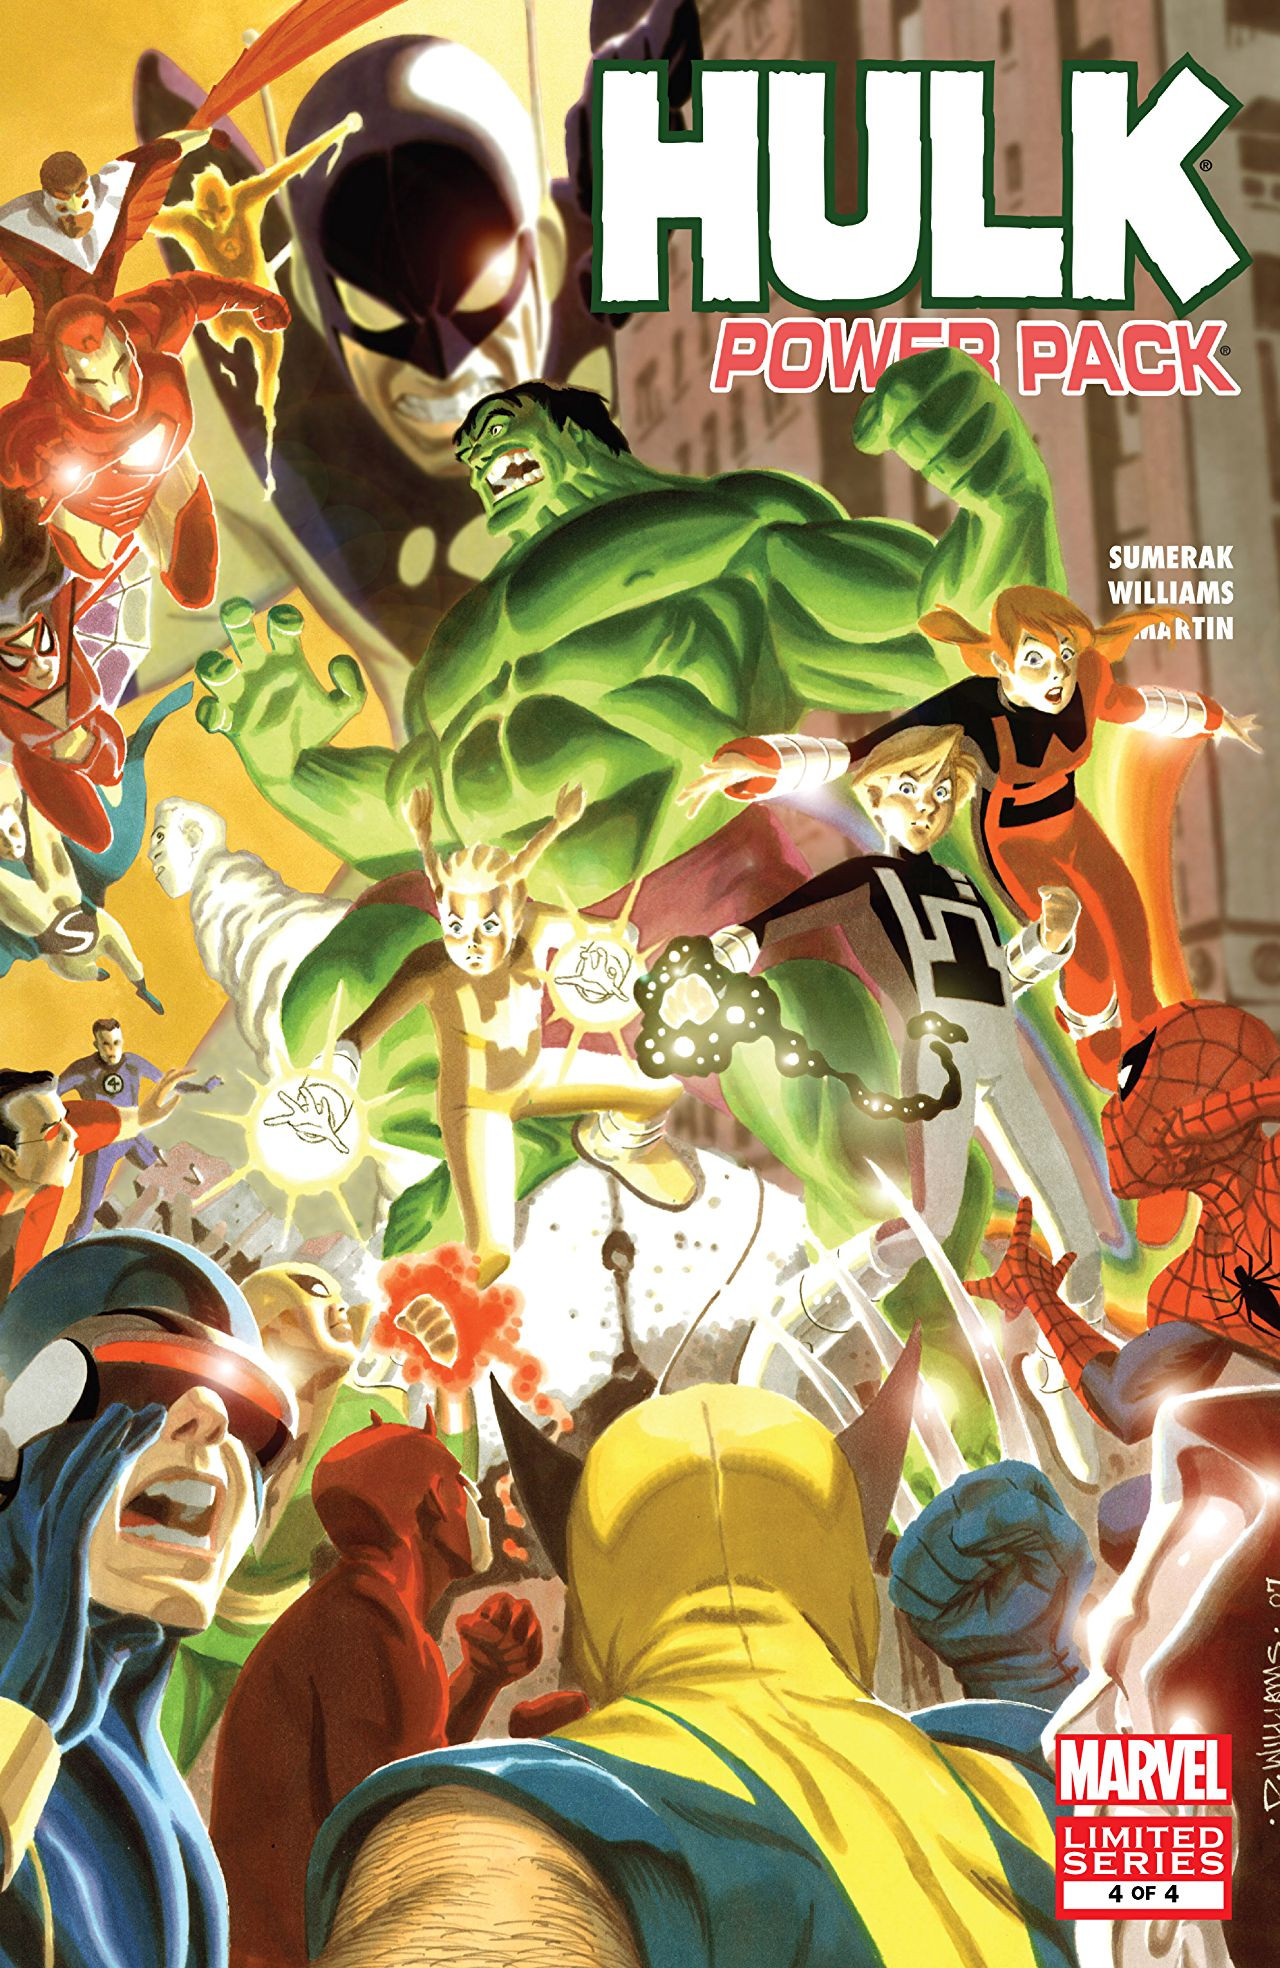 X-Men and Power Pack (2005) #3, Comic Issues